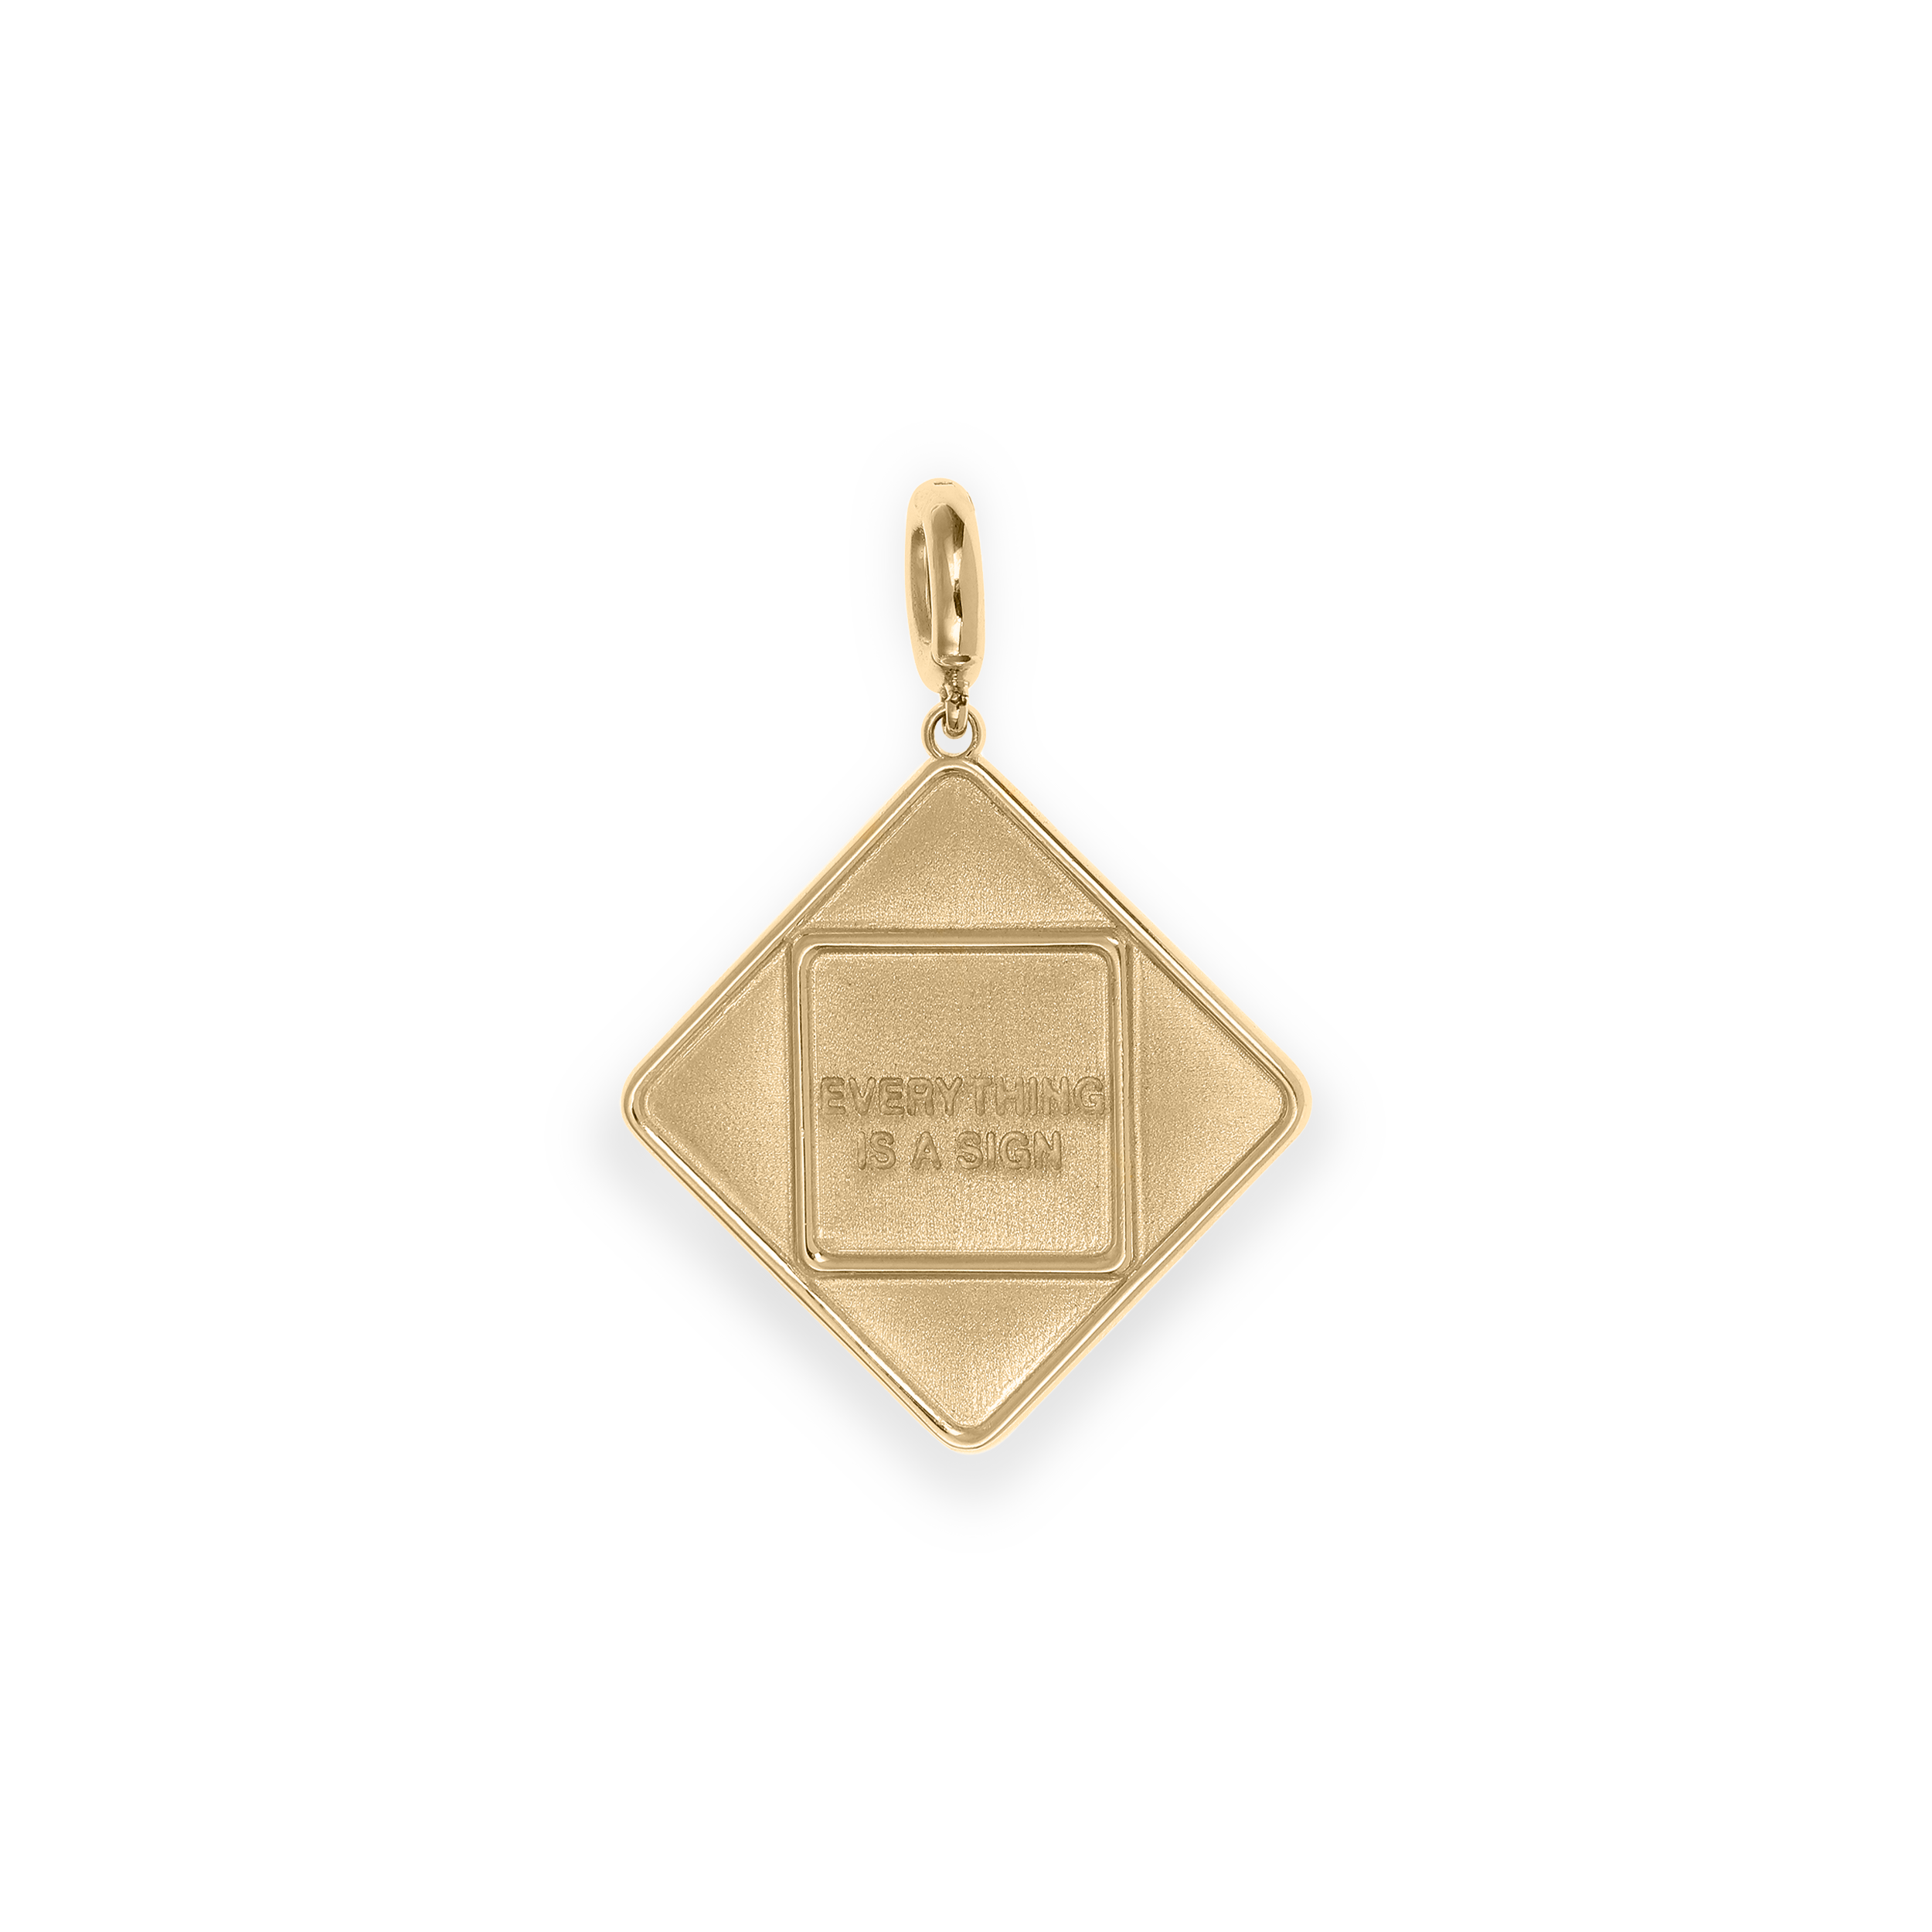 Bruno Yellow Gold "Everything is a Sign" Pendant